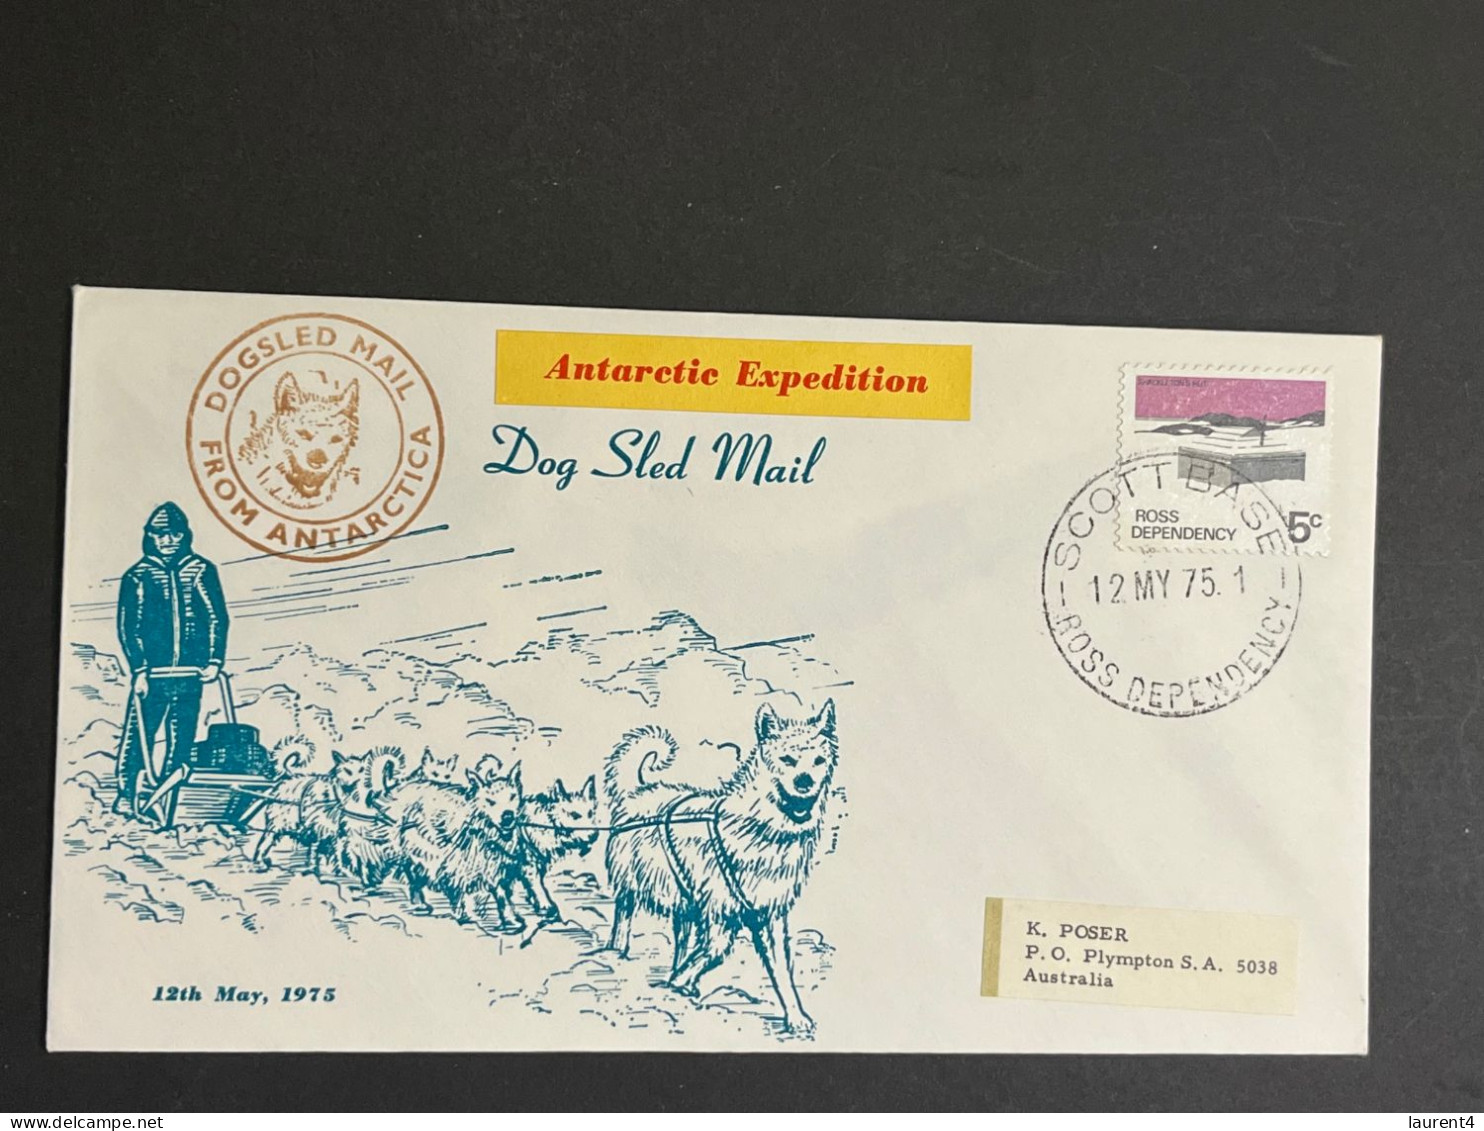 (1 Q 24 A) New Zealand Antarctica - Ross Dependency - Dog Sled Mail (Antarctic Expedition Cover) 12th May 1973 - FDC